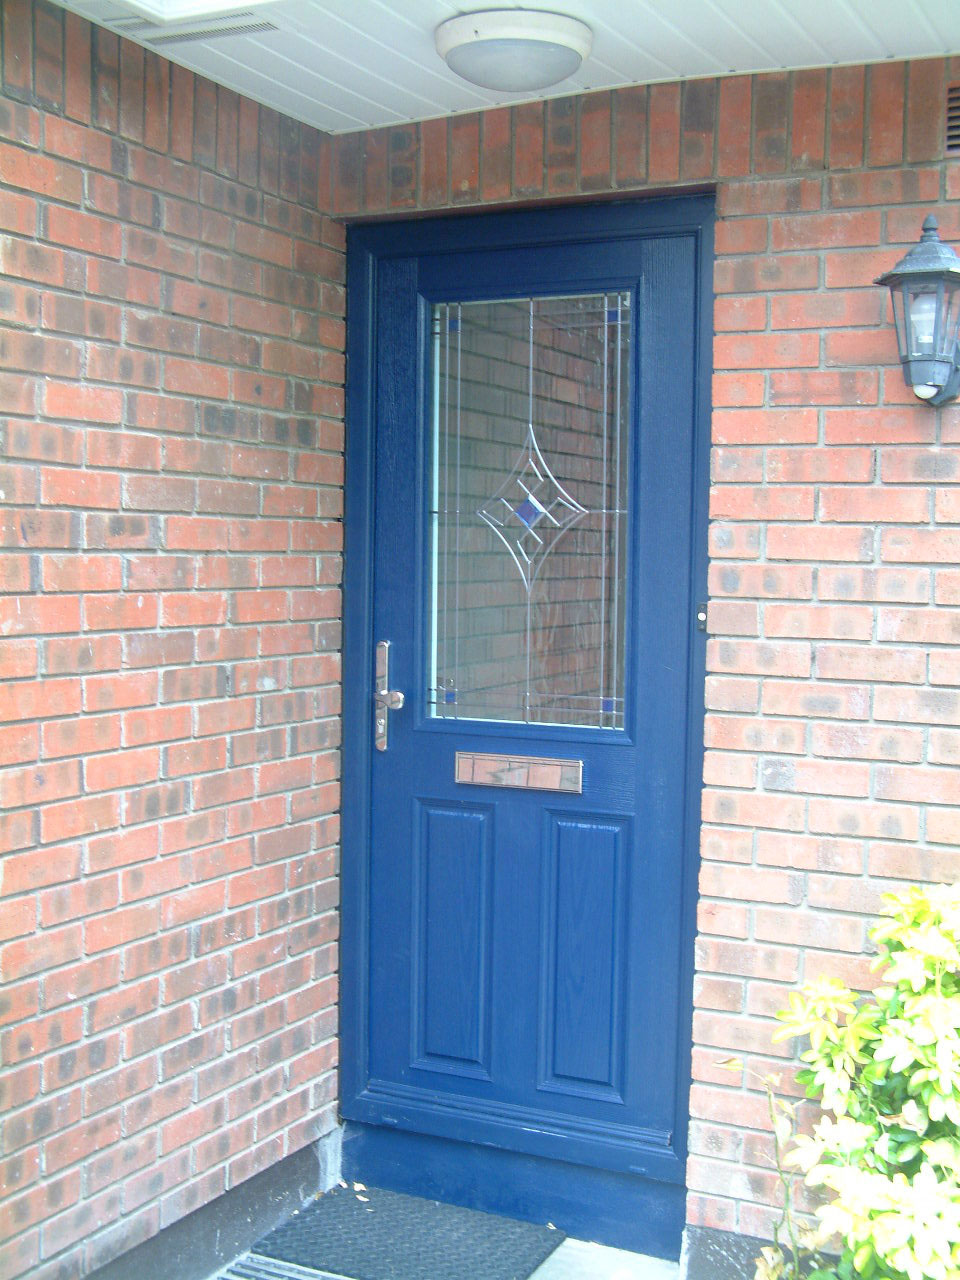 BLUE APEER COMPOSITE FRONT DOOR FITTED BY ASGARD WINDOWS IN CO. DUBLIN.